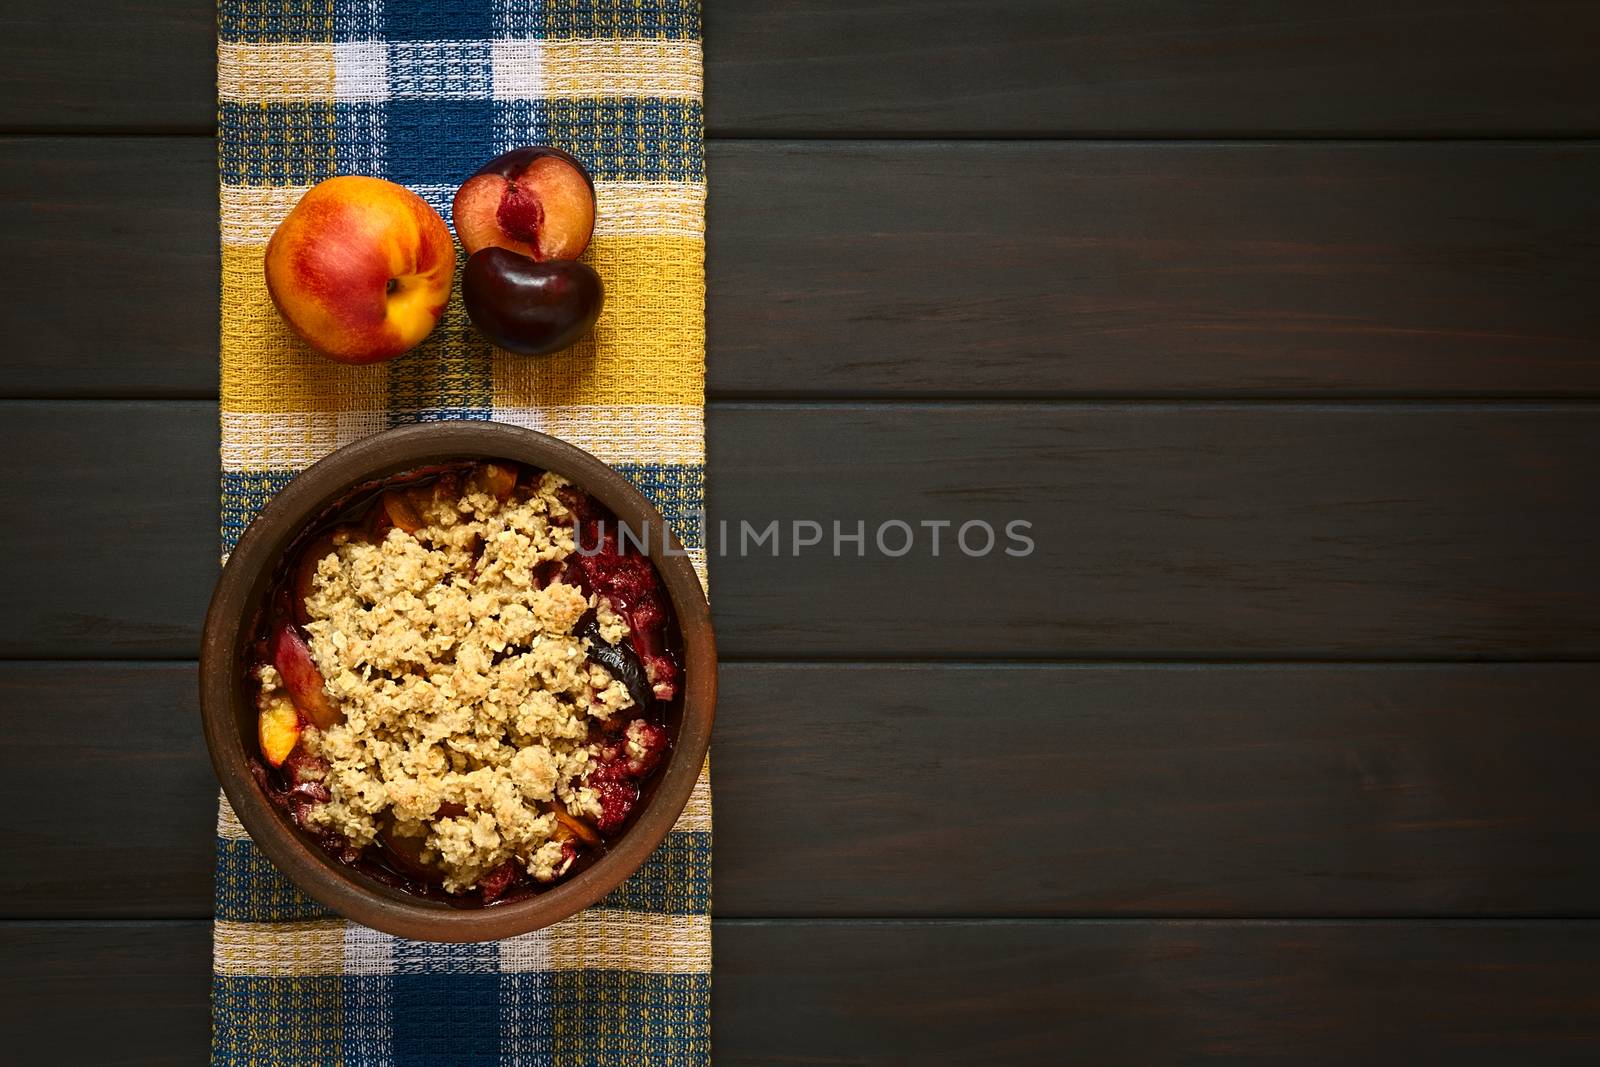 Overhead shot of a rustic bowl filled with baked plum and nectarine crumble or crisp, photographed on cloth on dark wood with natural light